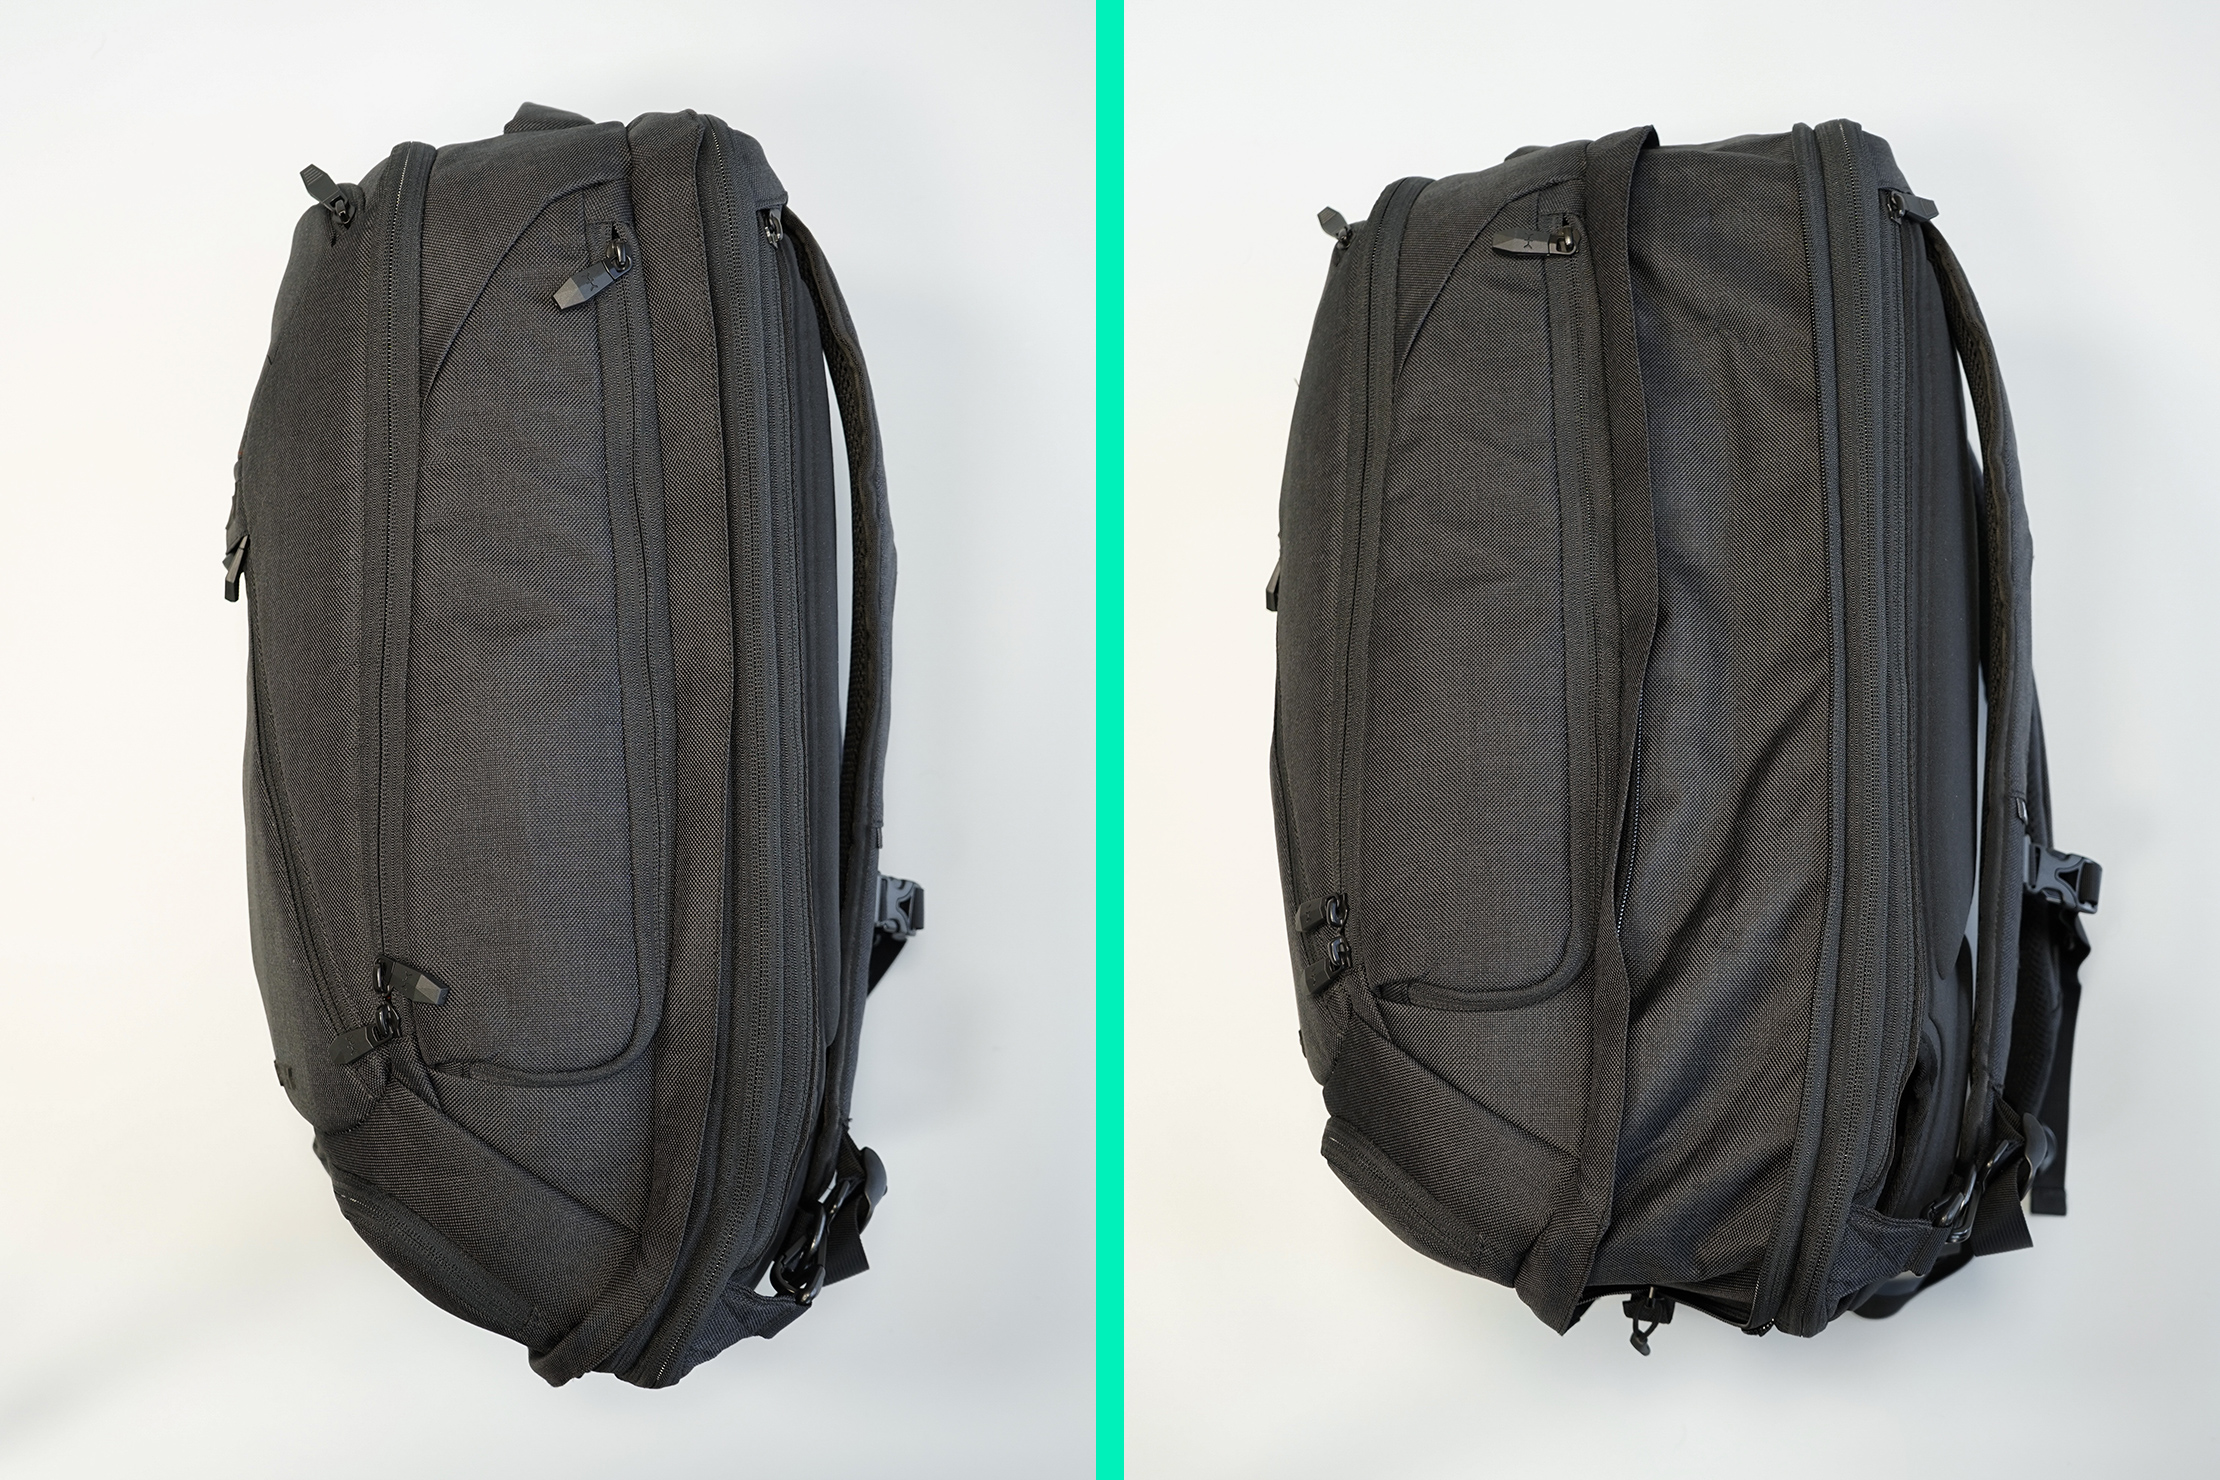 Knack Large Expandable Pack Compressed (Left) Expanded (Right)